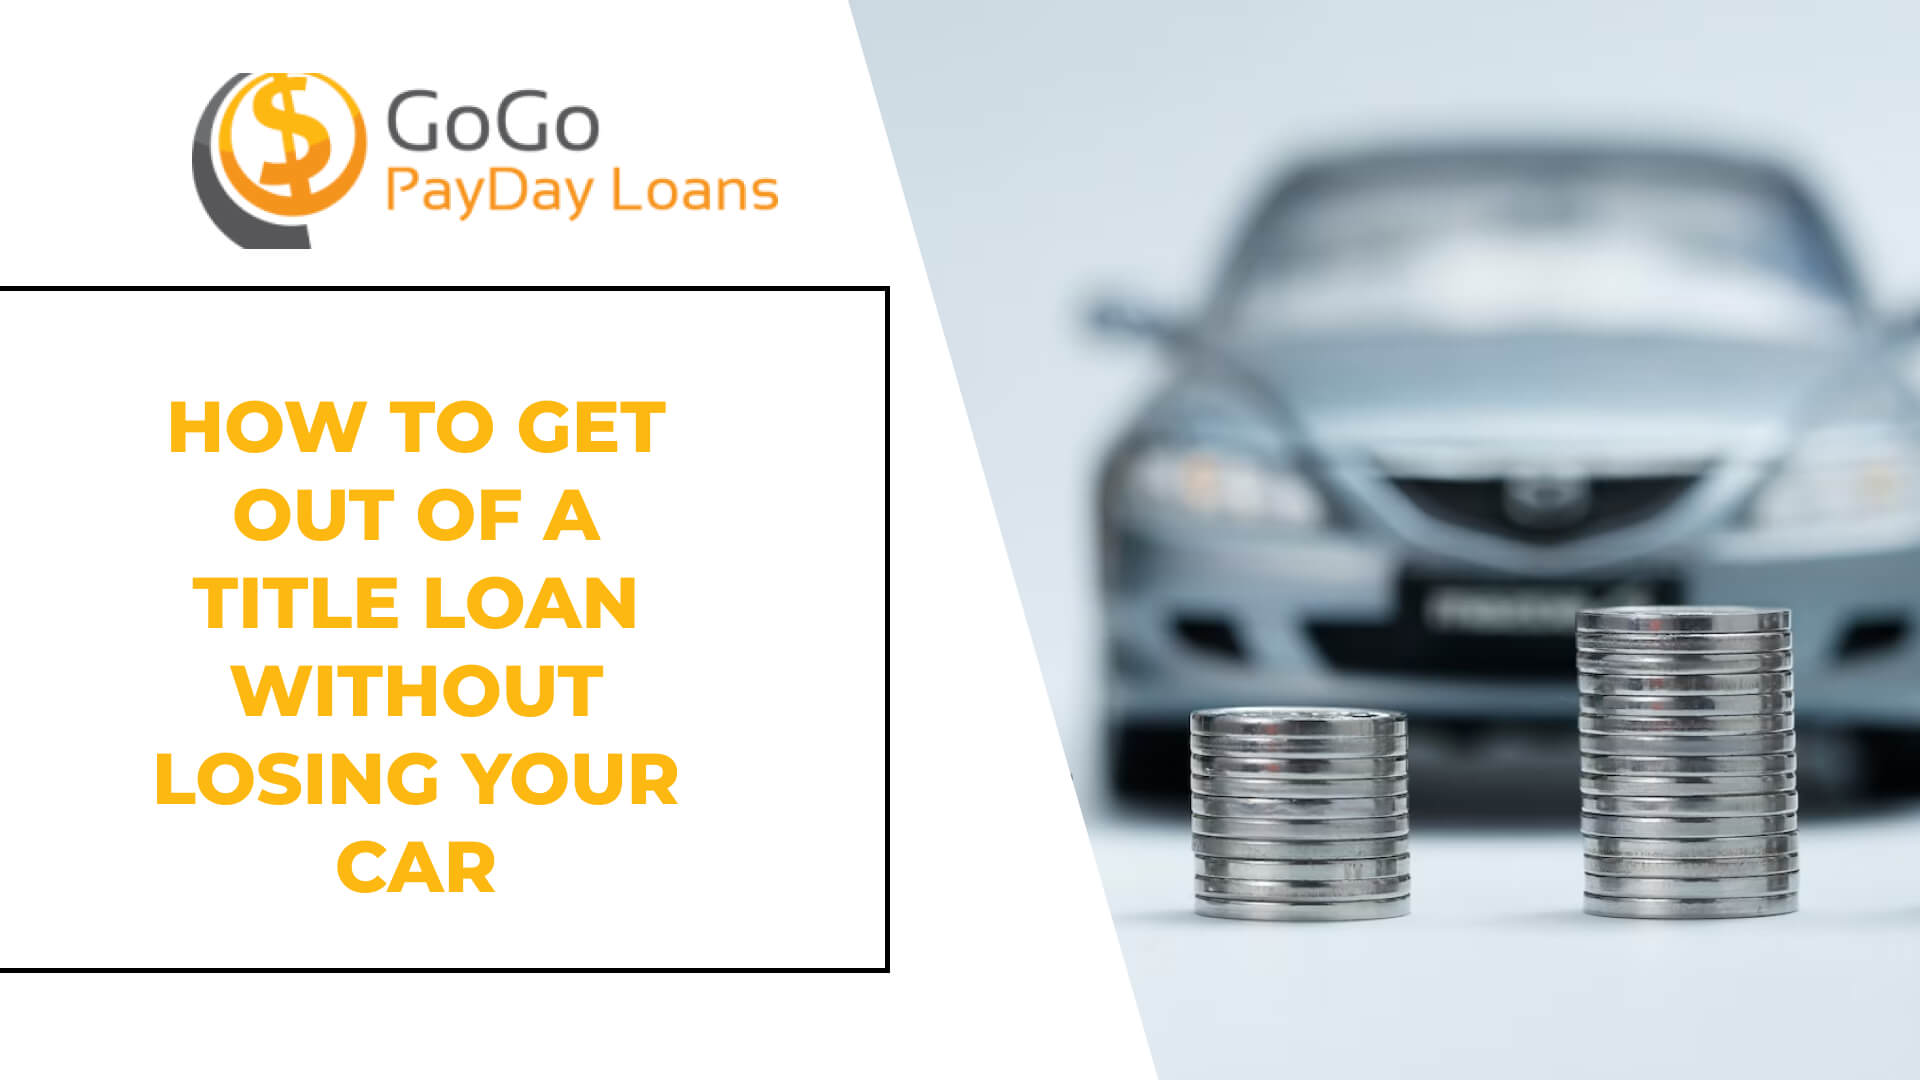 How To Get Out Of A Title Loan Without Losing Your Car